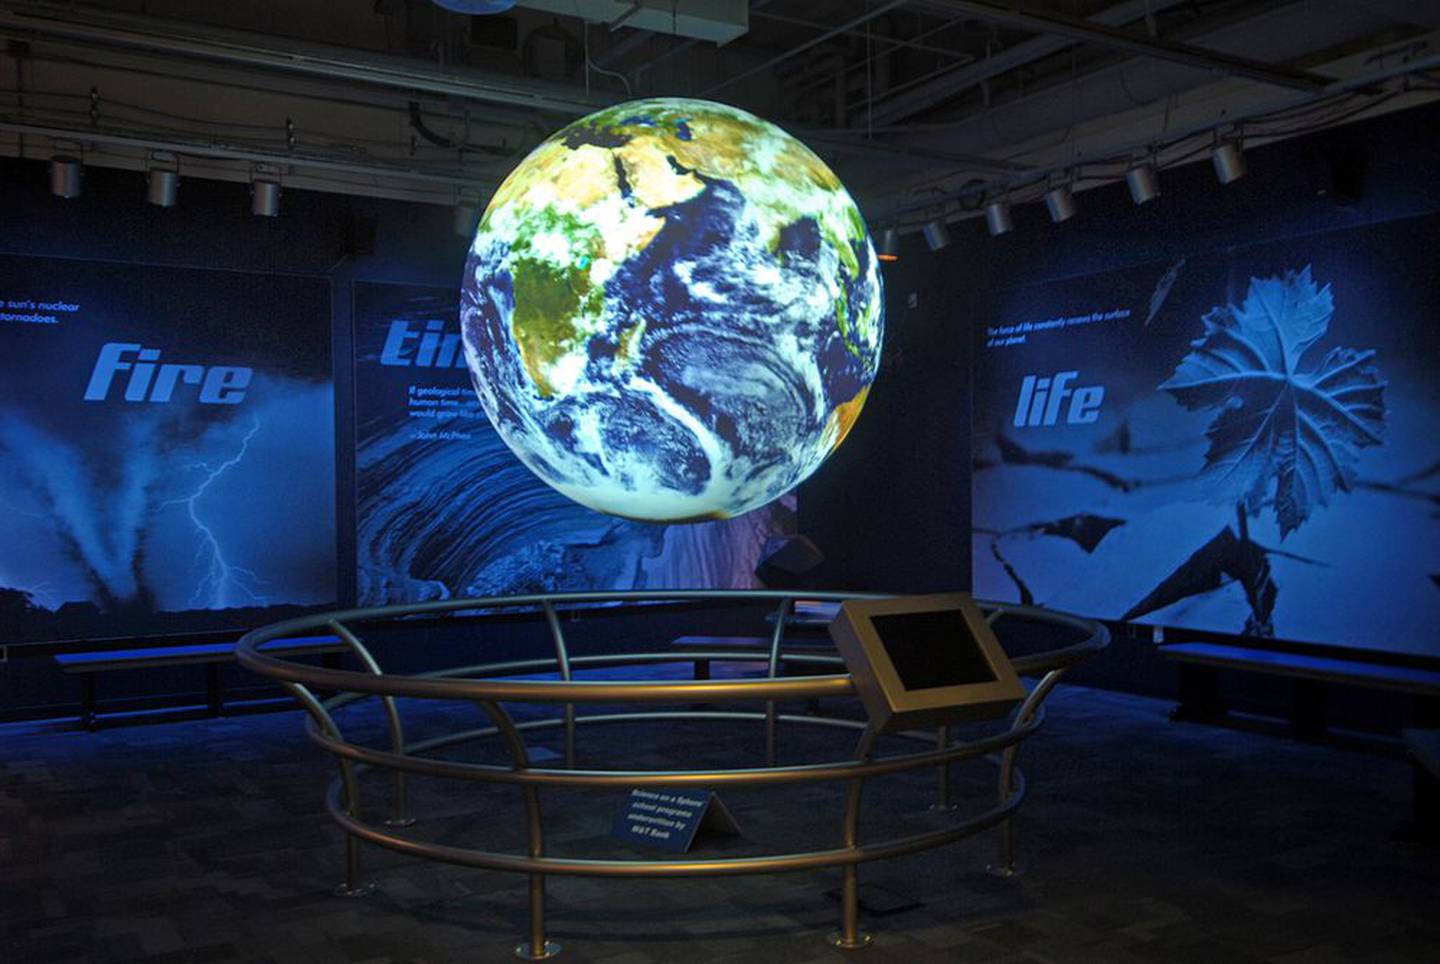 "Science on the Sphere," an exhibit at Northern Illinois University's Founders Memorial Library, will run through March 25, 2022.